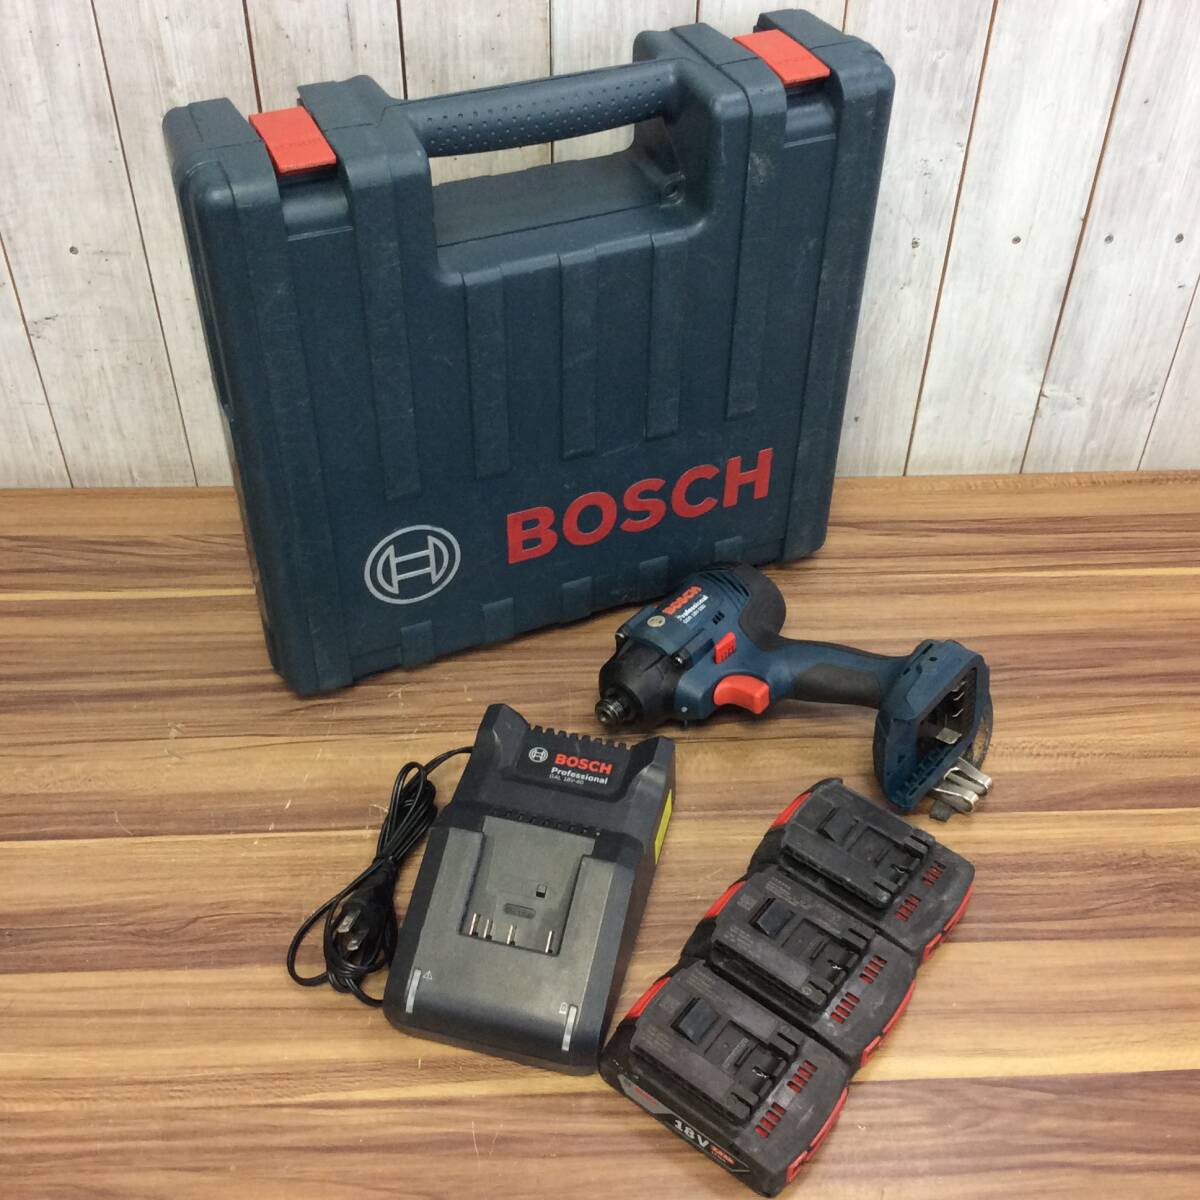 [TH-1704] secondhand goods BOSCH Bosch battery impact driver GDR18V-160 battery 3 piece with charger 